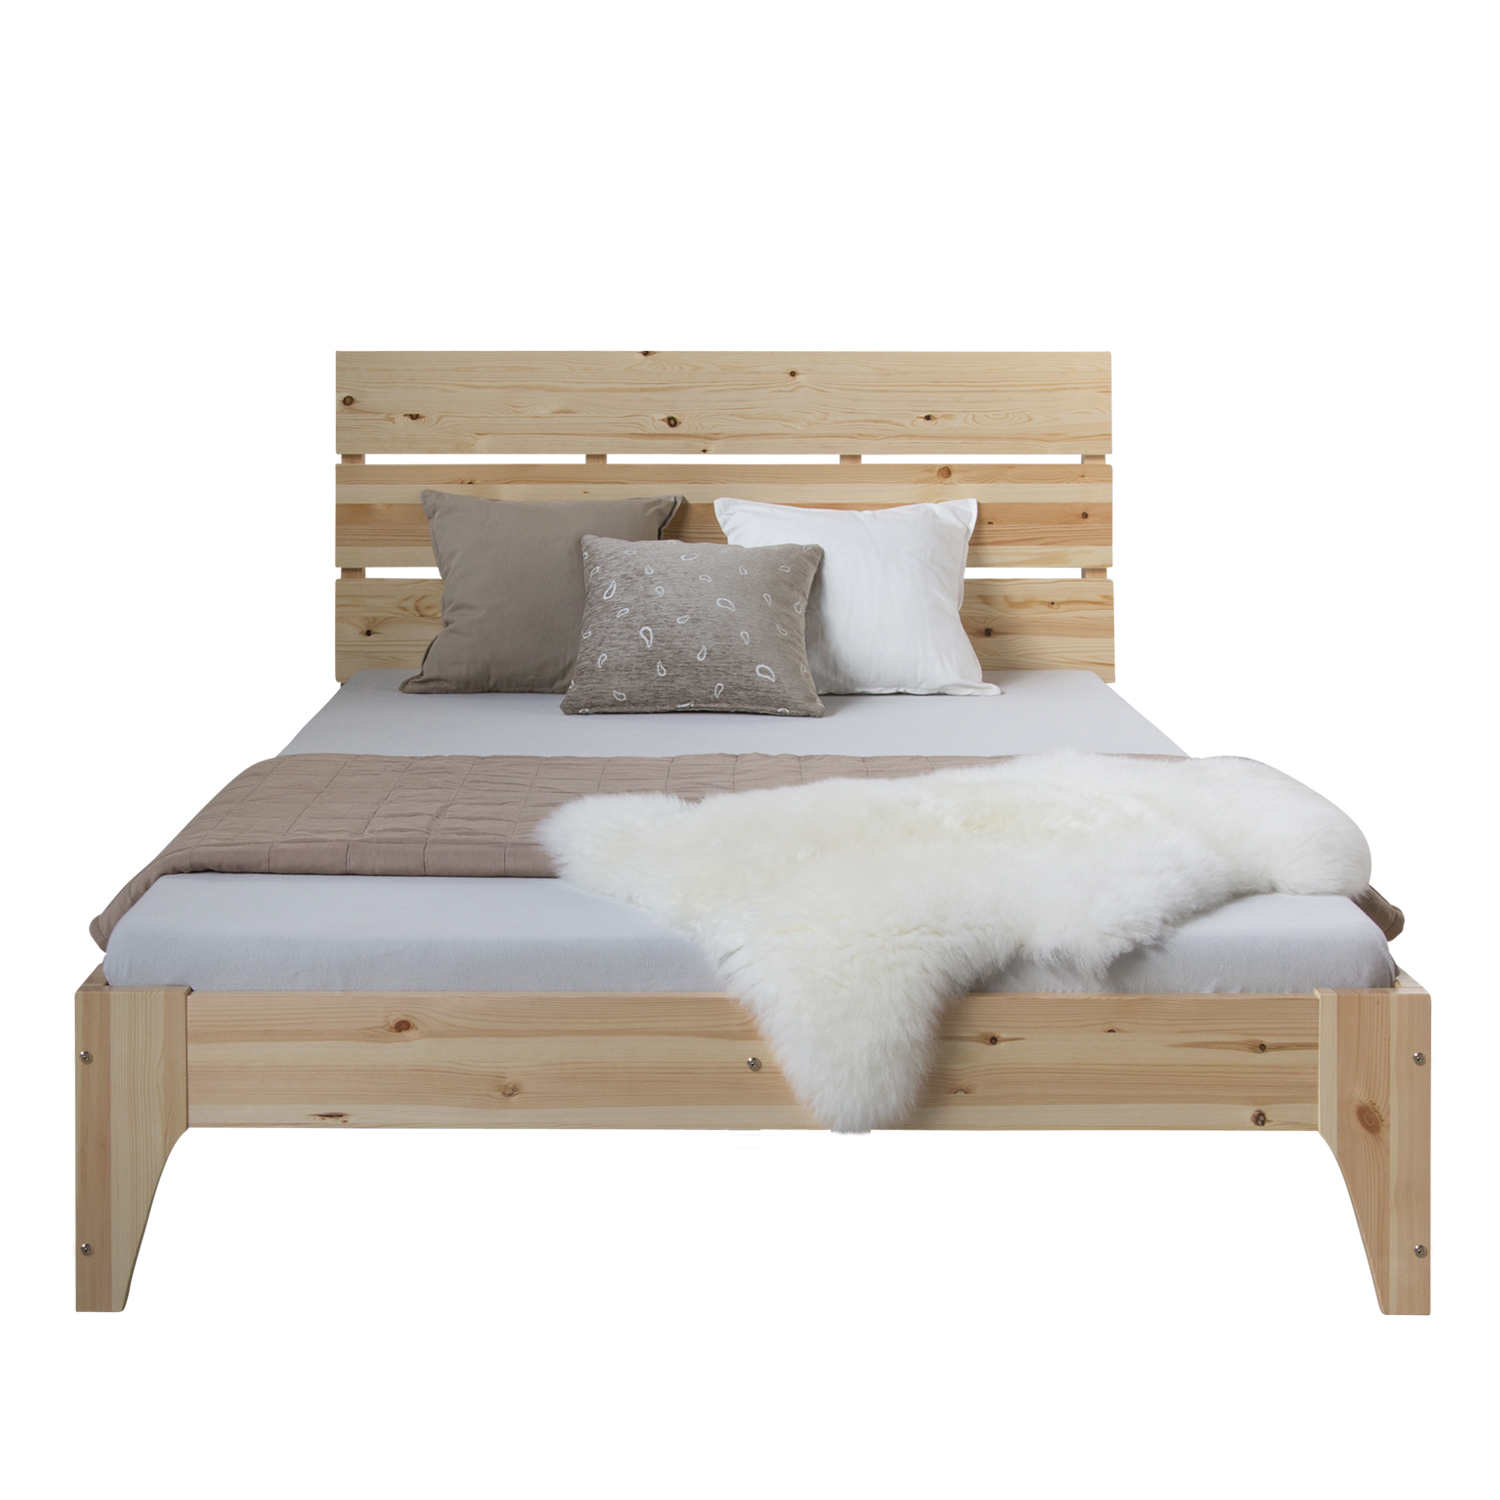 Double bed wooden bed bed futon bed 140x200 light pine bed